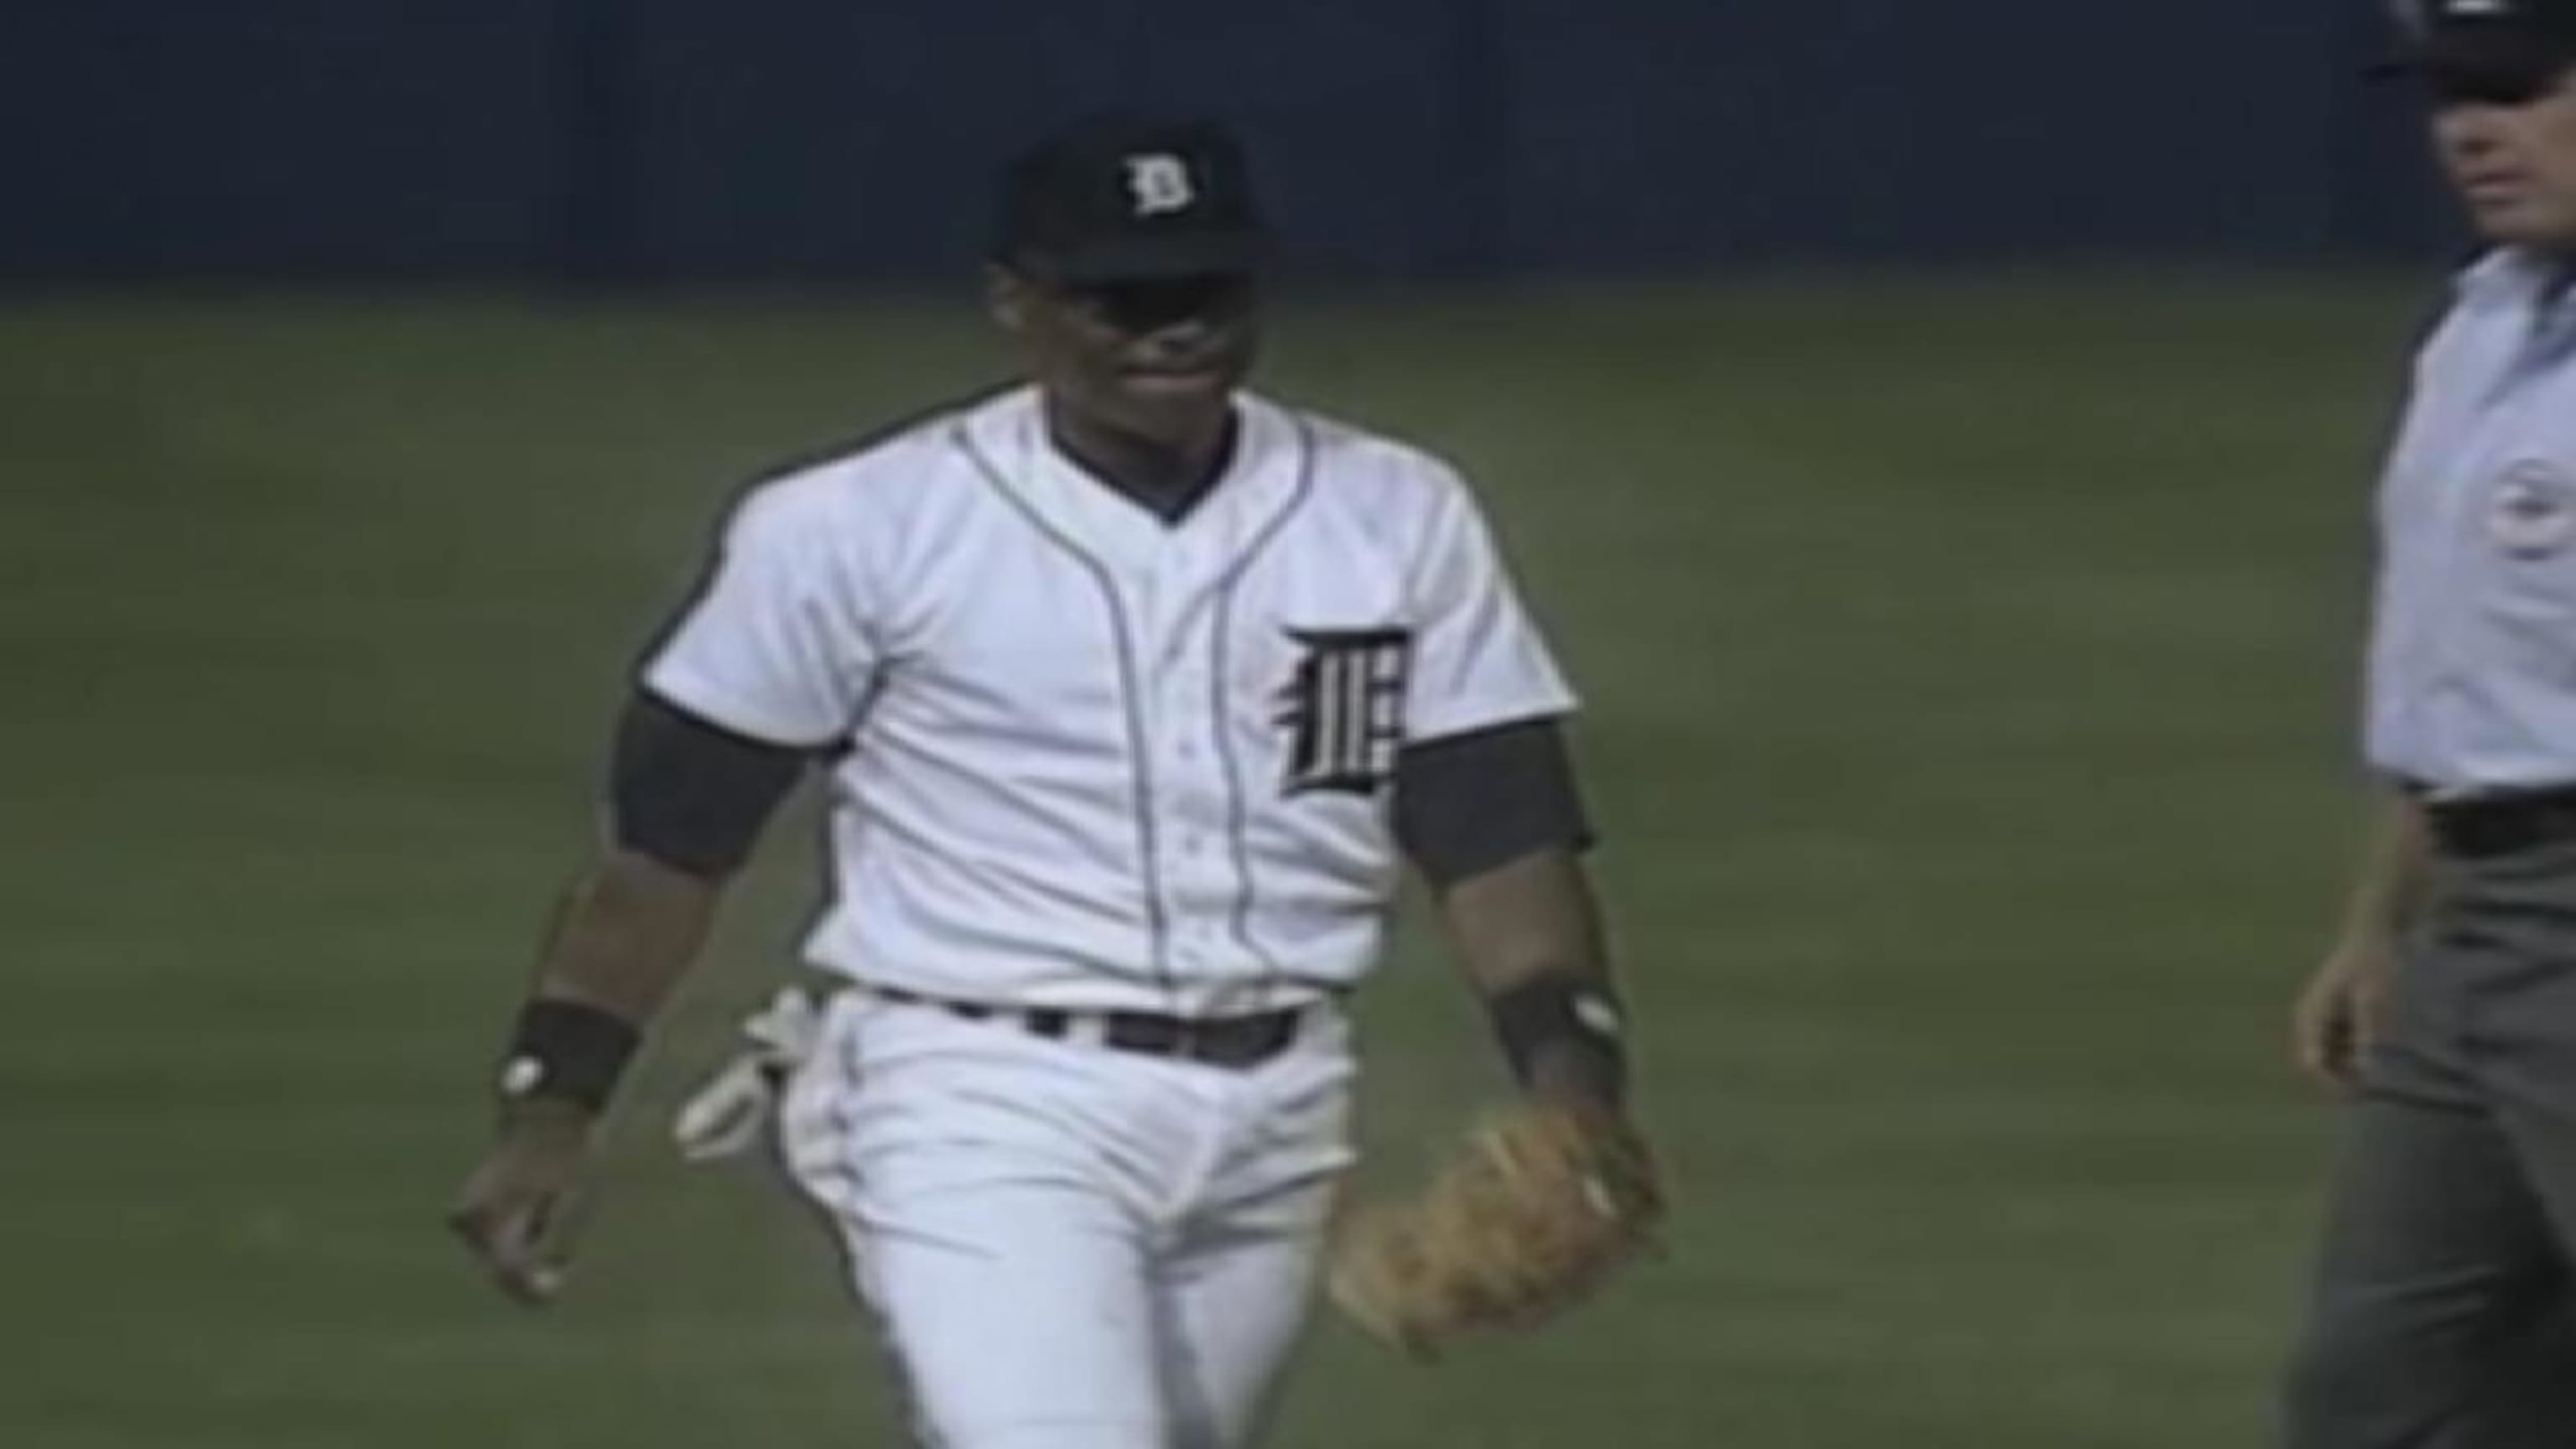 Lou Whitaker is best second baseman not in the Hall of Fame, MLB.com says 